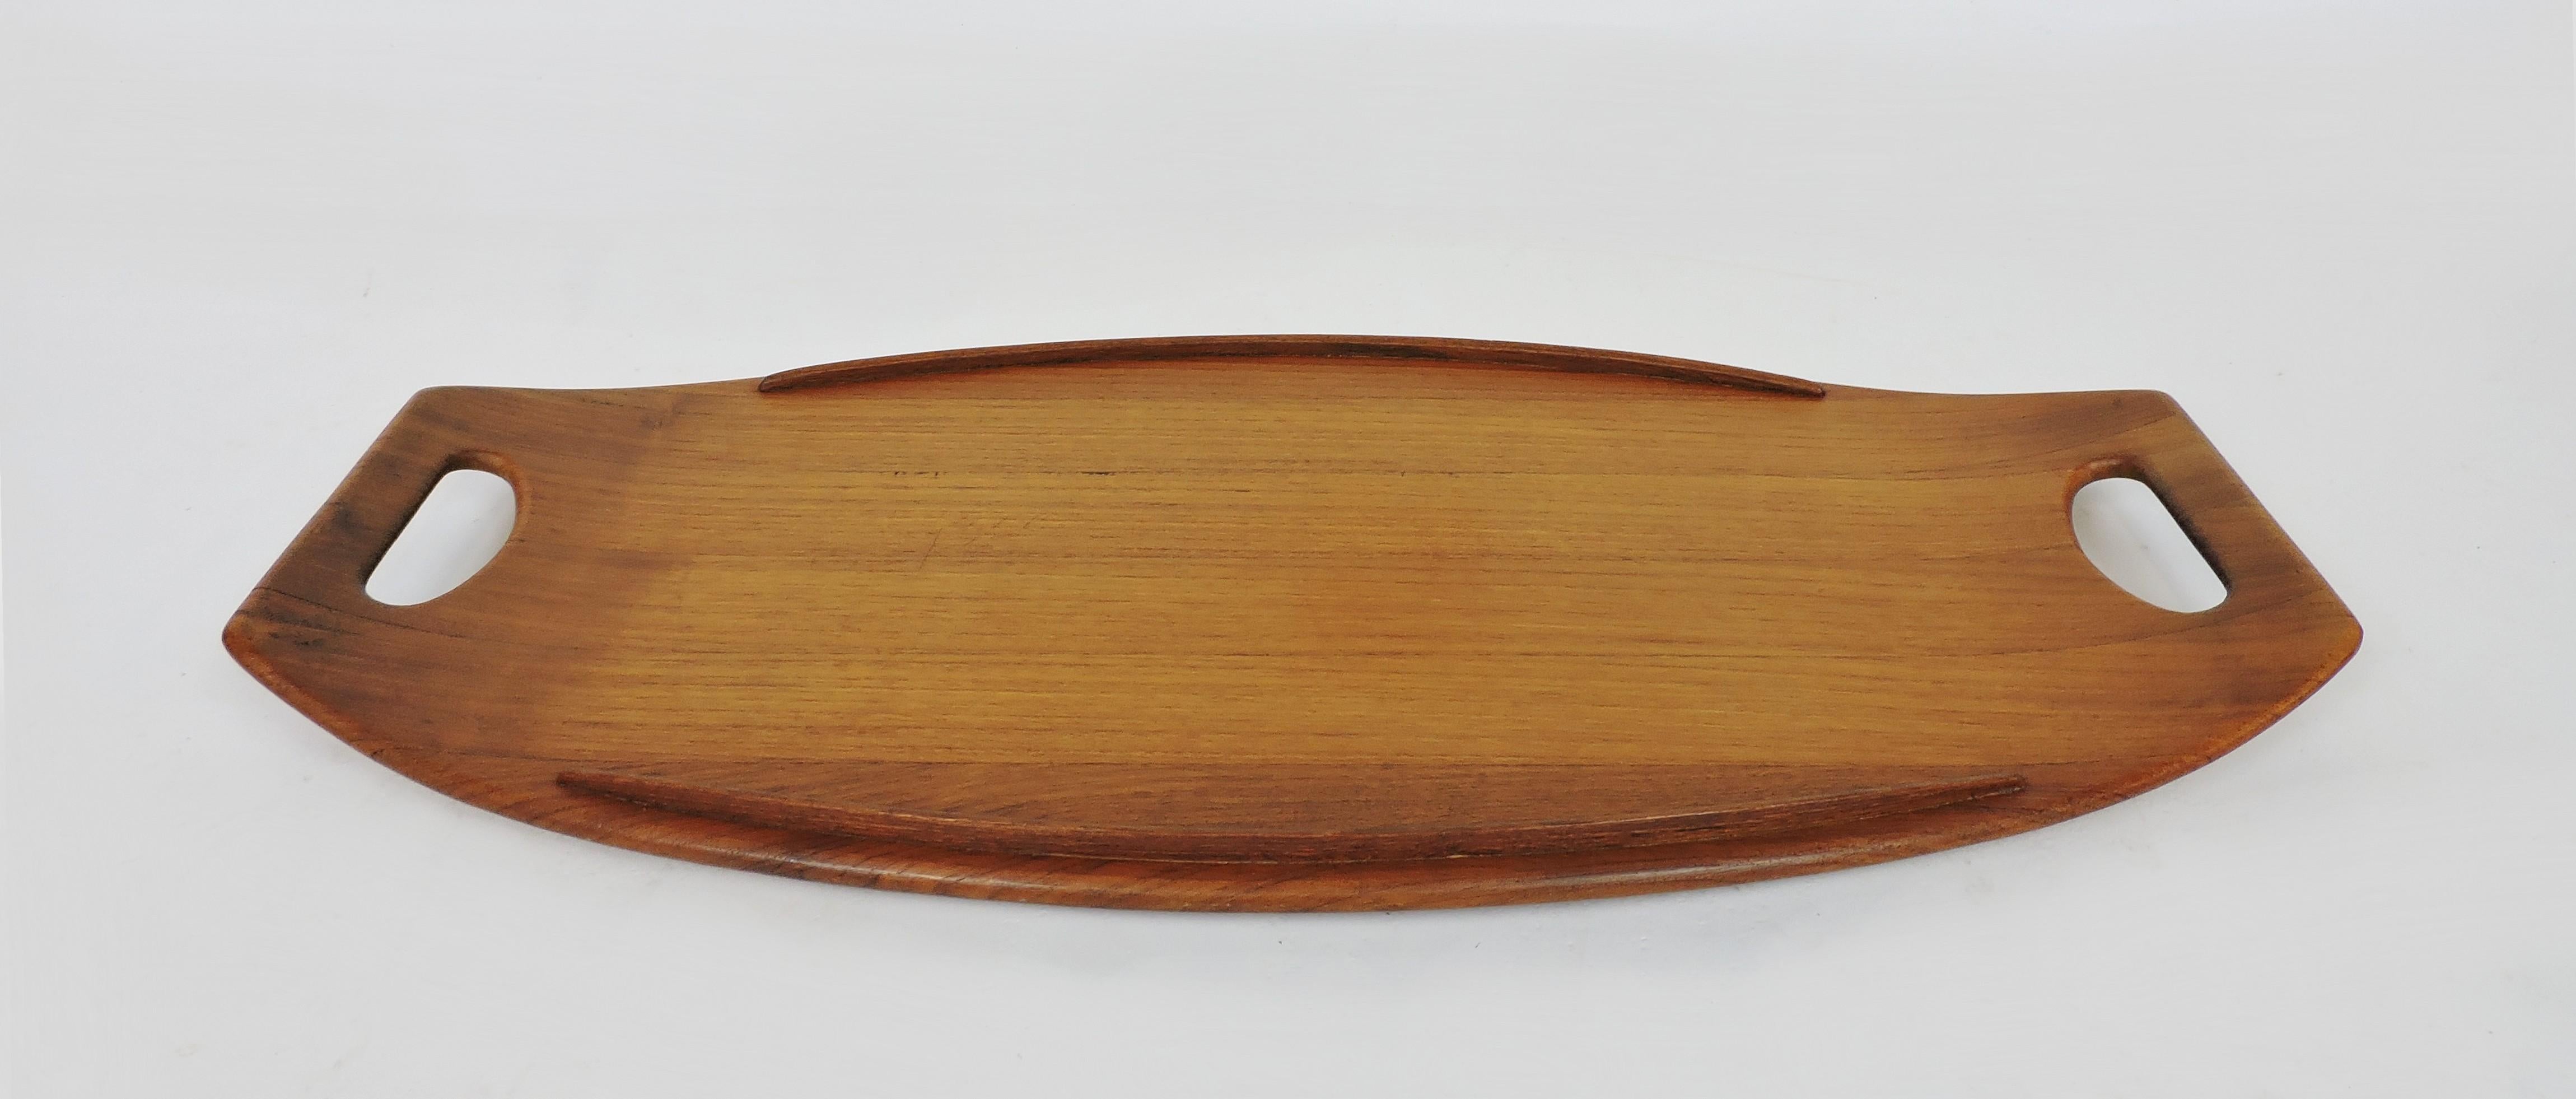 Beautiful and elegant staved teak serving tray designed by Jens Quistgaard and made in Denmark by Dansk. This large tray is 23.5 inches long with a graceful shape and an early Dansk mark. Serve in style!